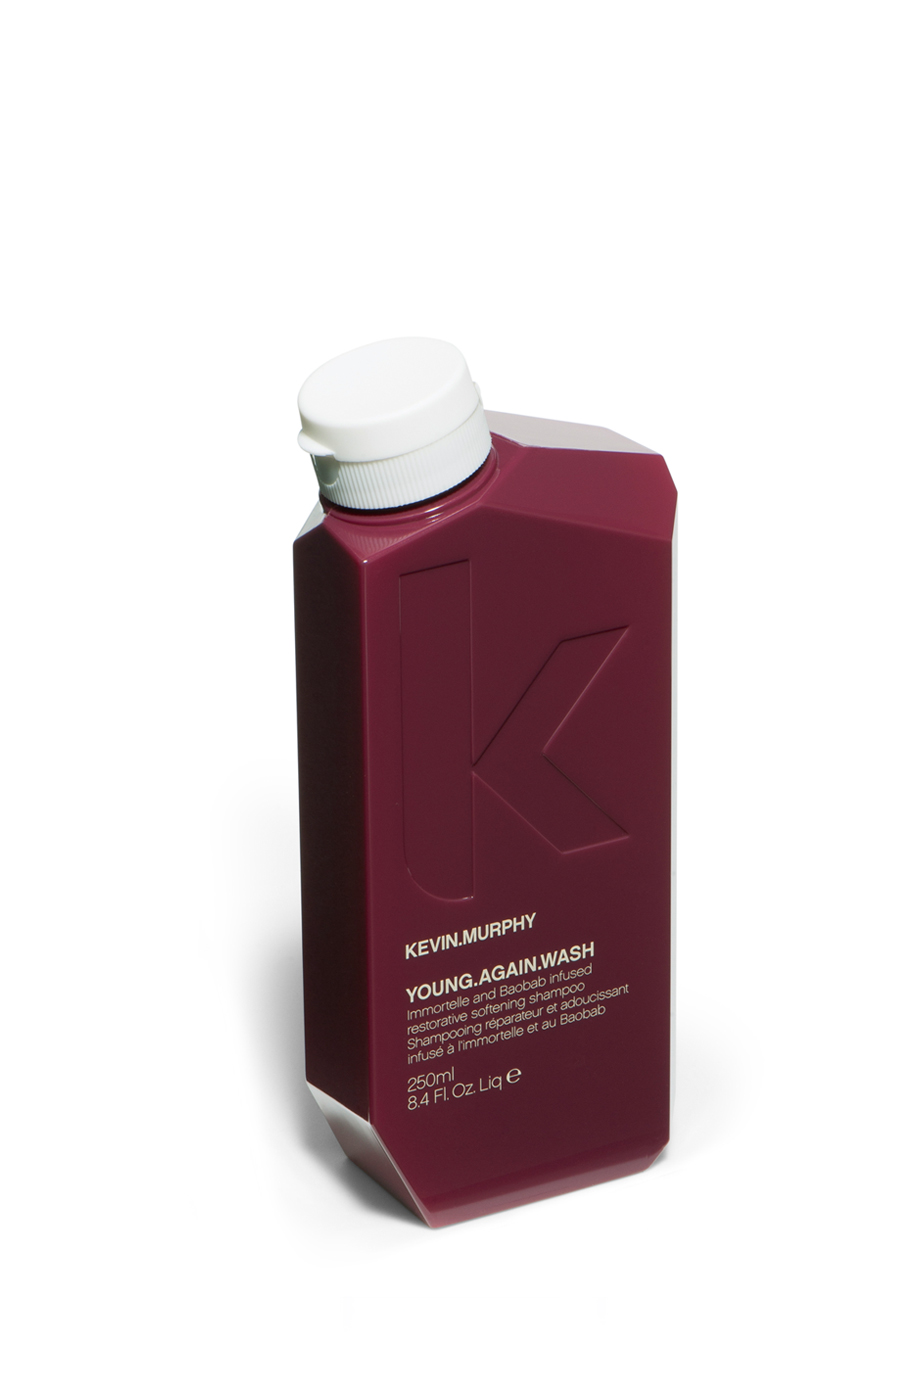 Kevin.Murphy Young.Again.Wash 250 ml.